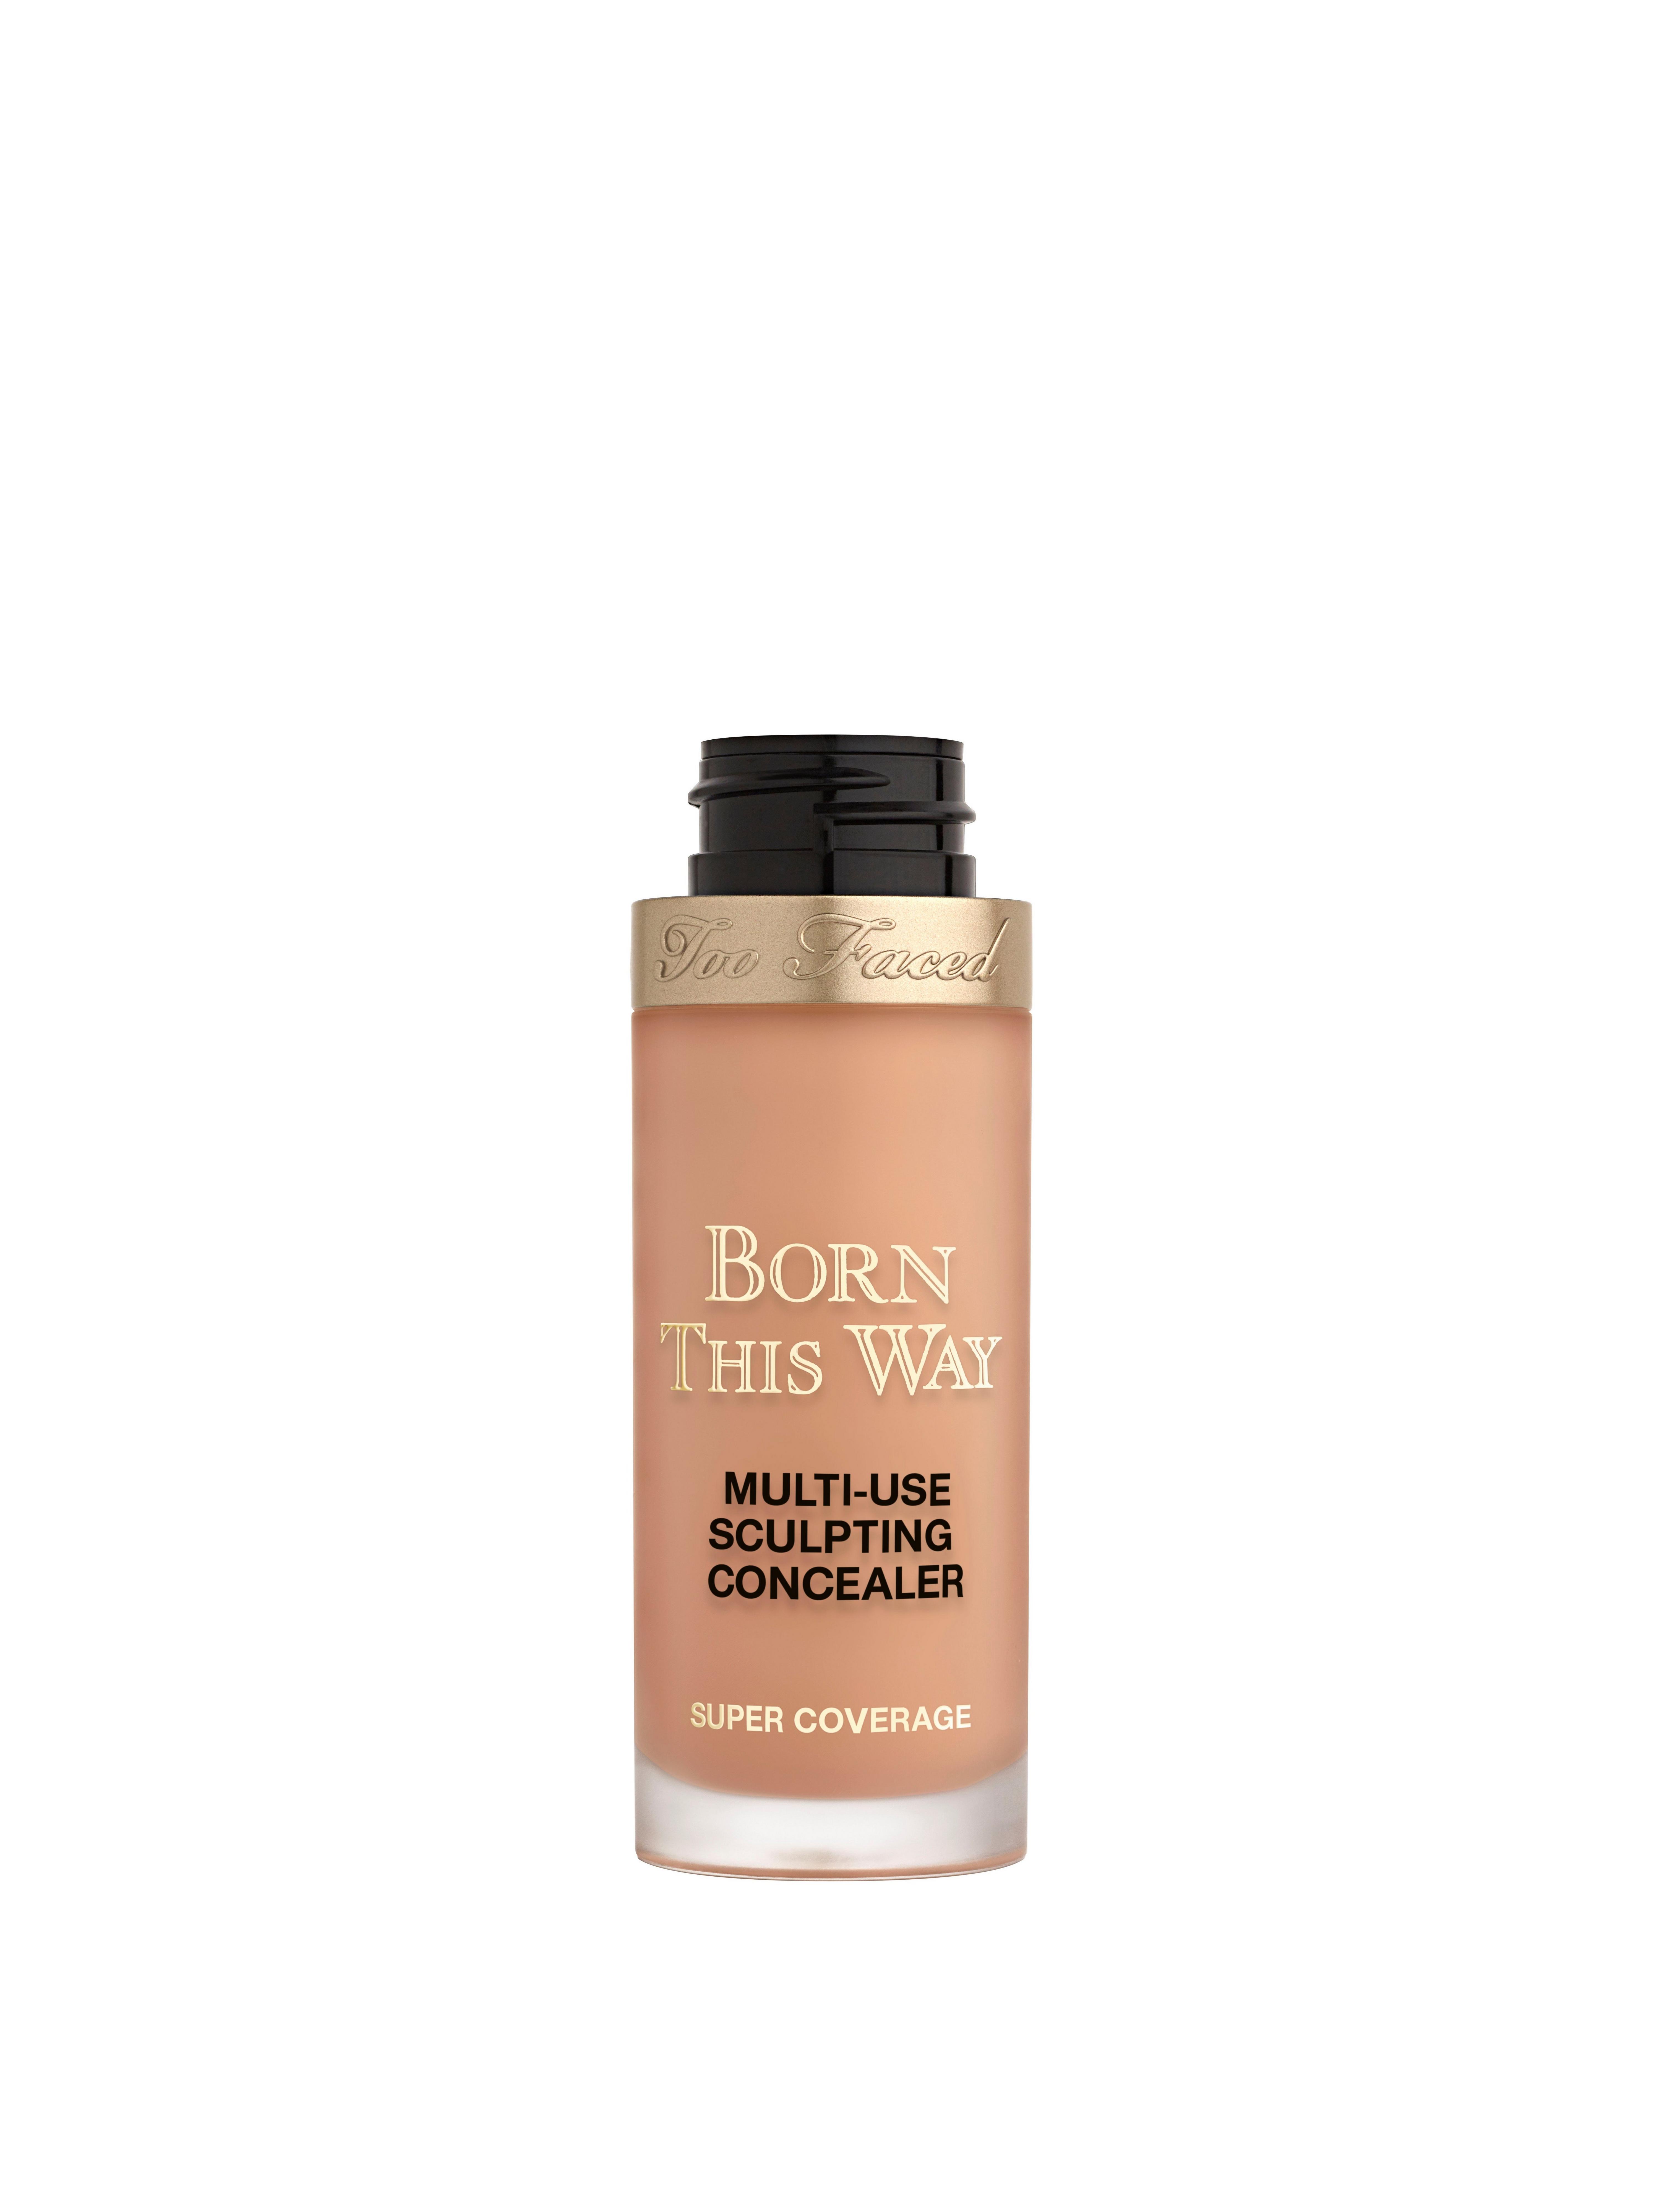 Too Faced BTW SUPER COVERAGE Born This Way Super Coverage 